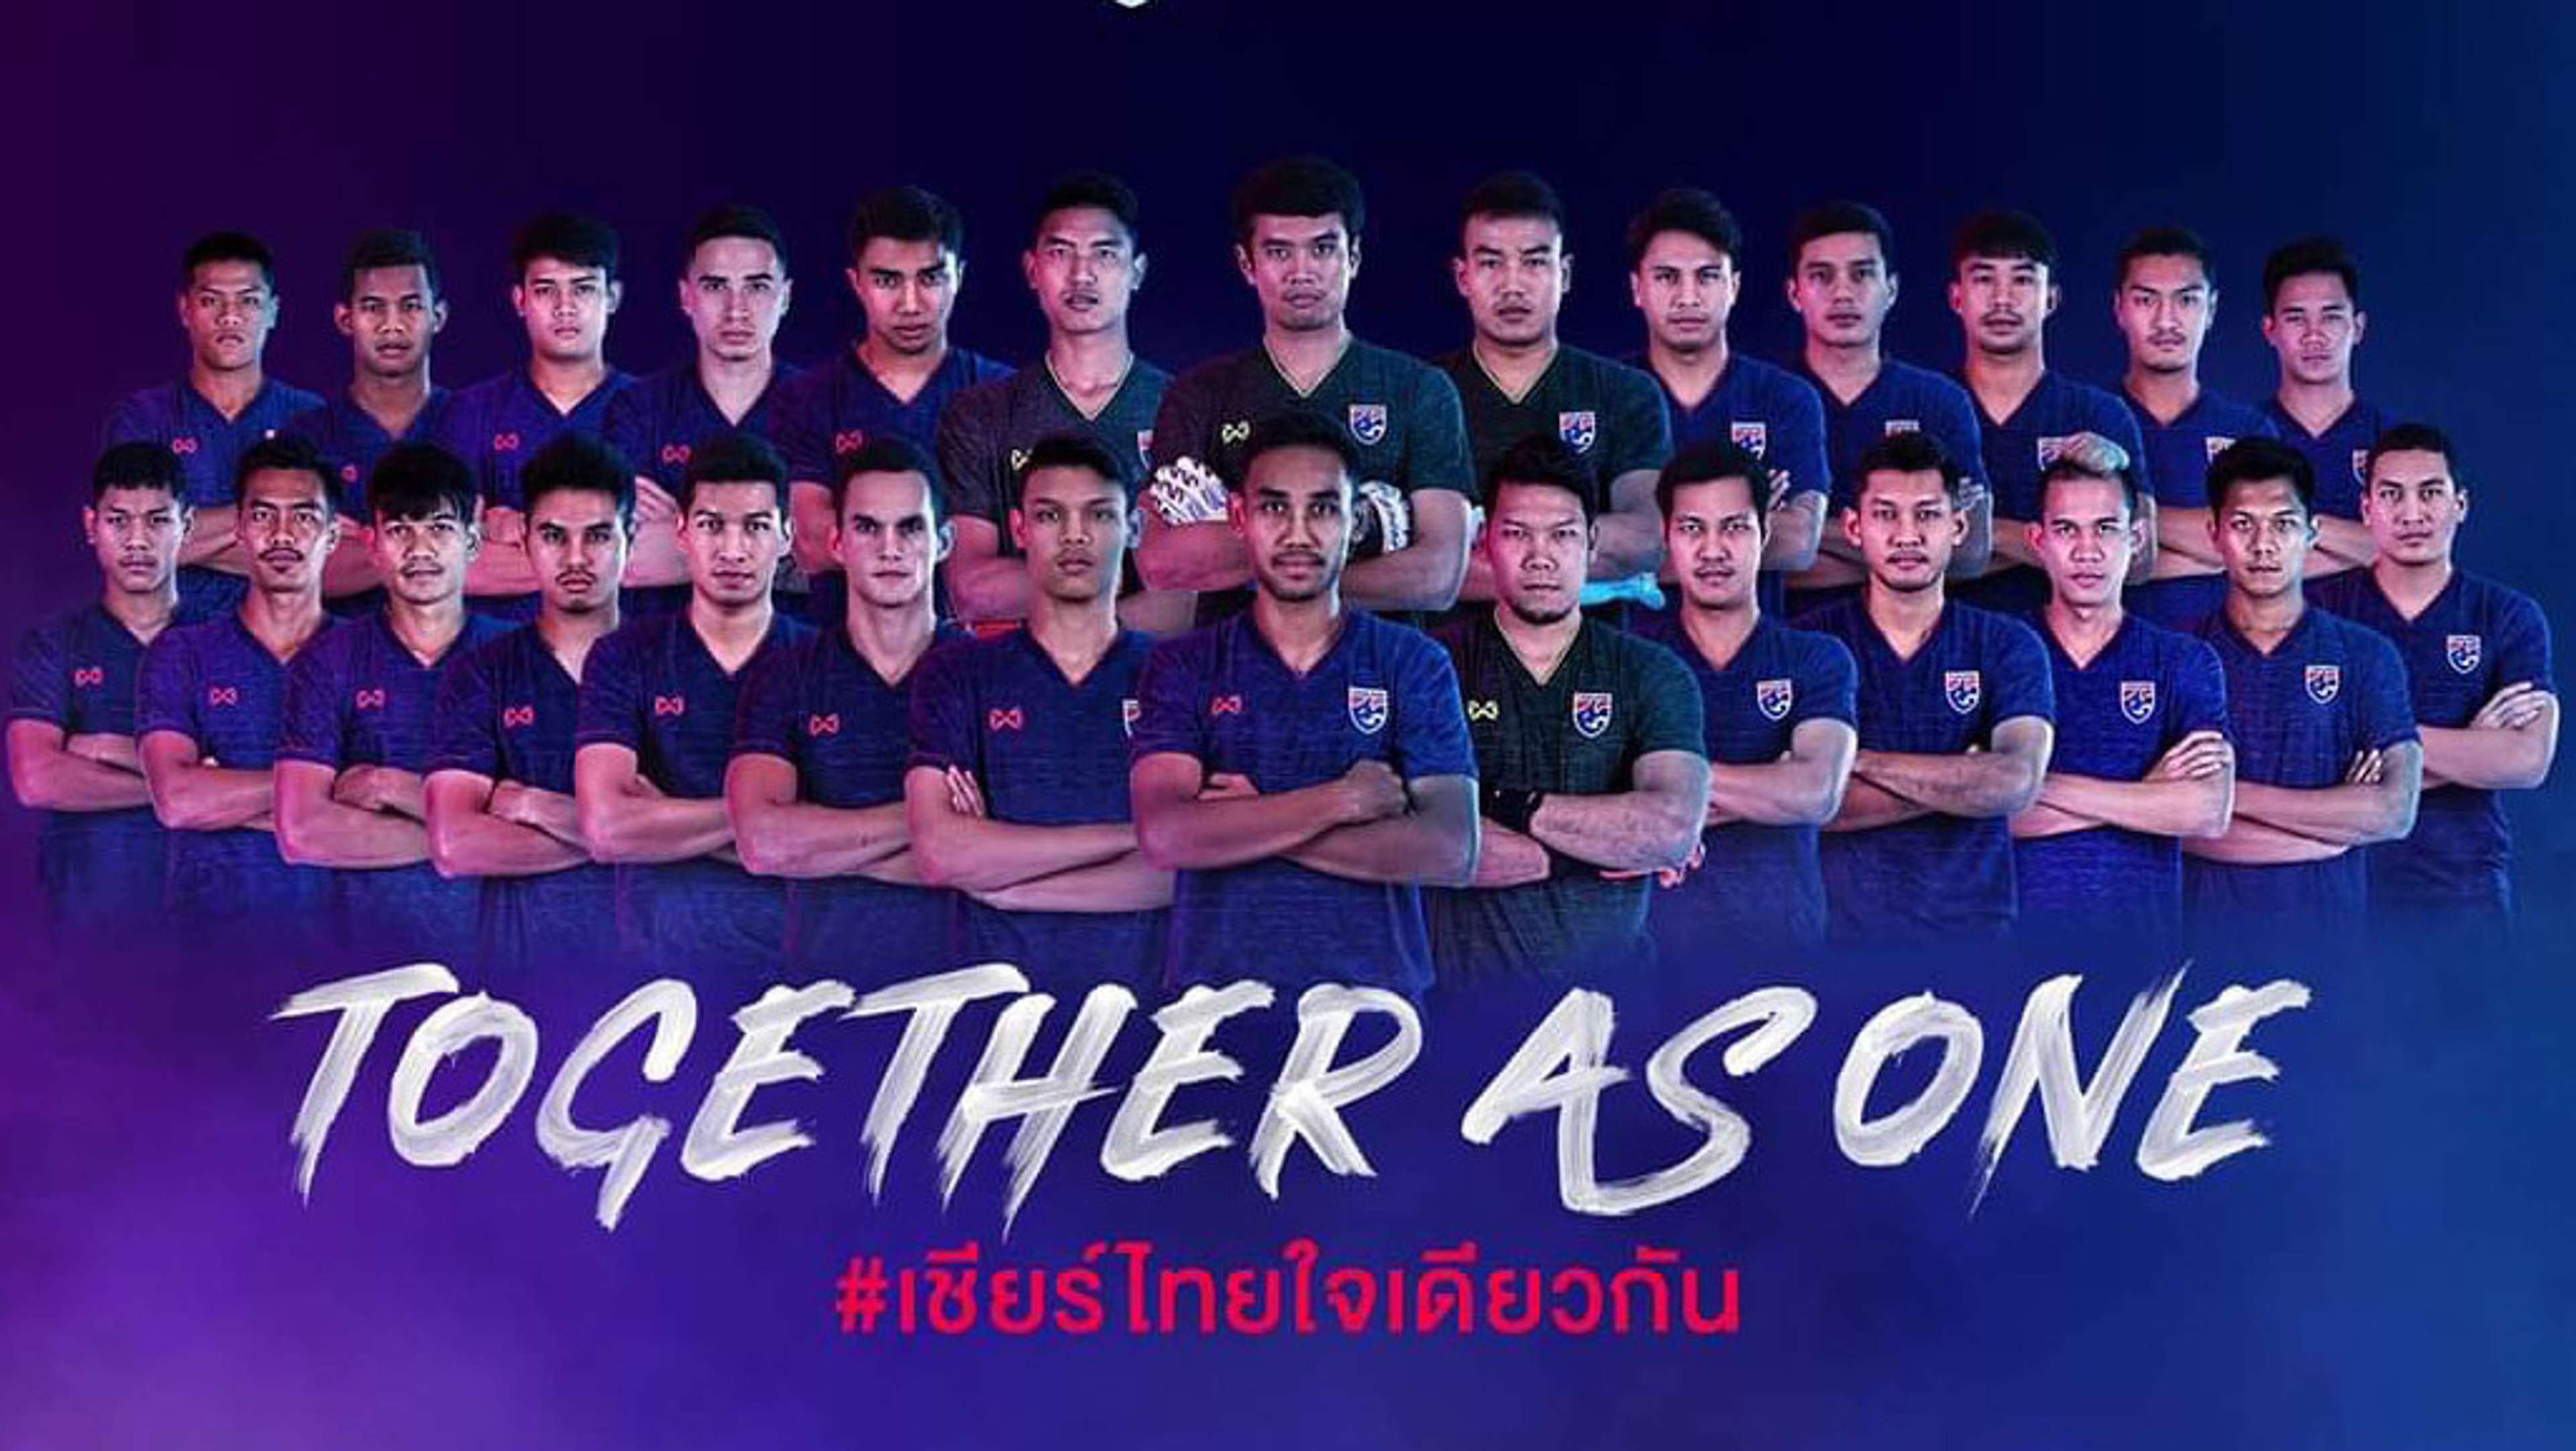 Thailand squad Asian Cup 2019